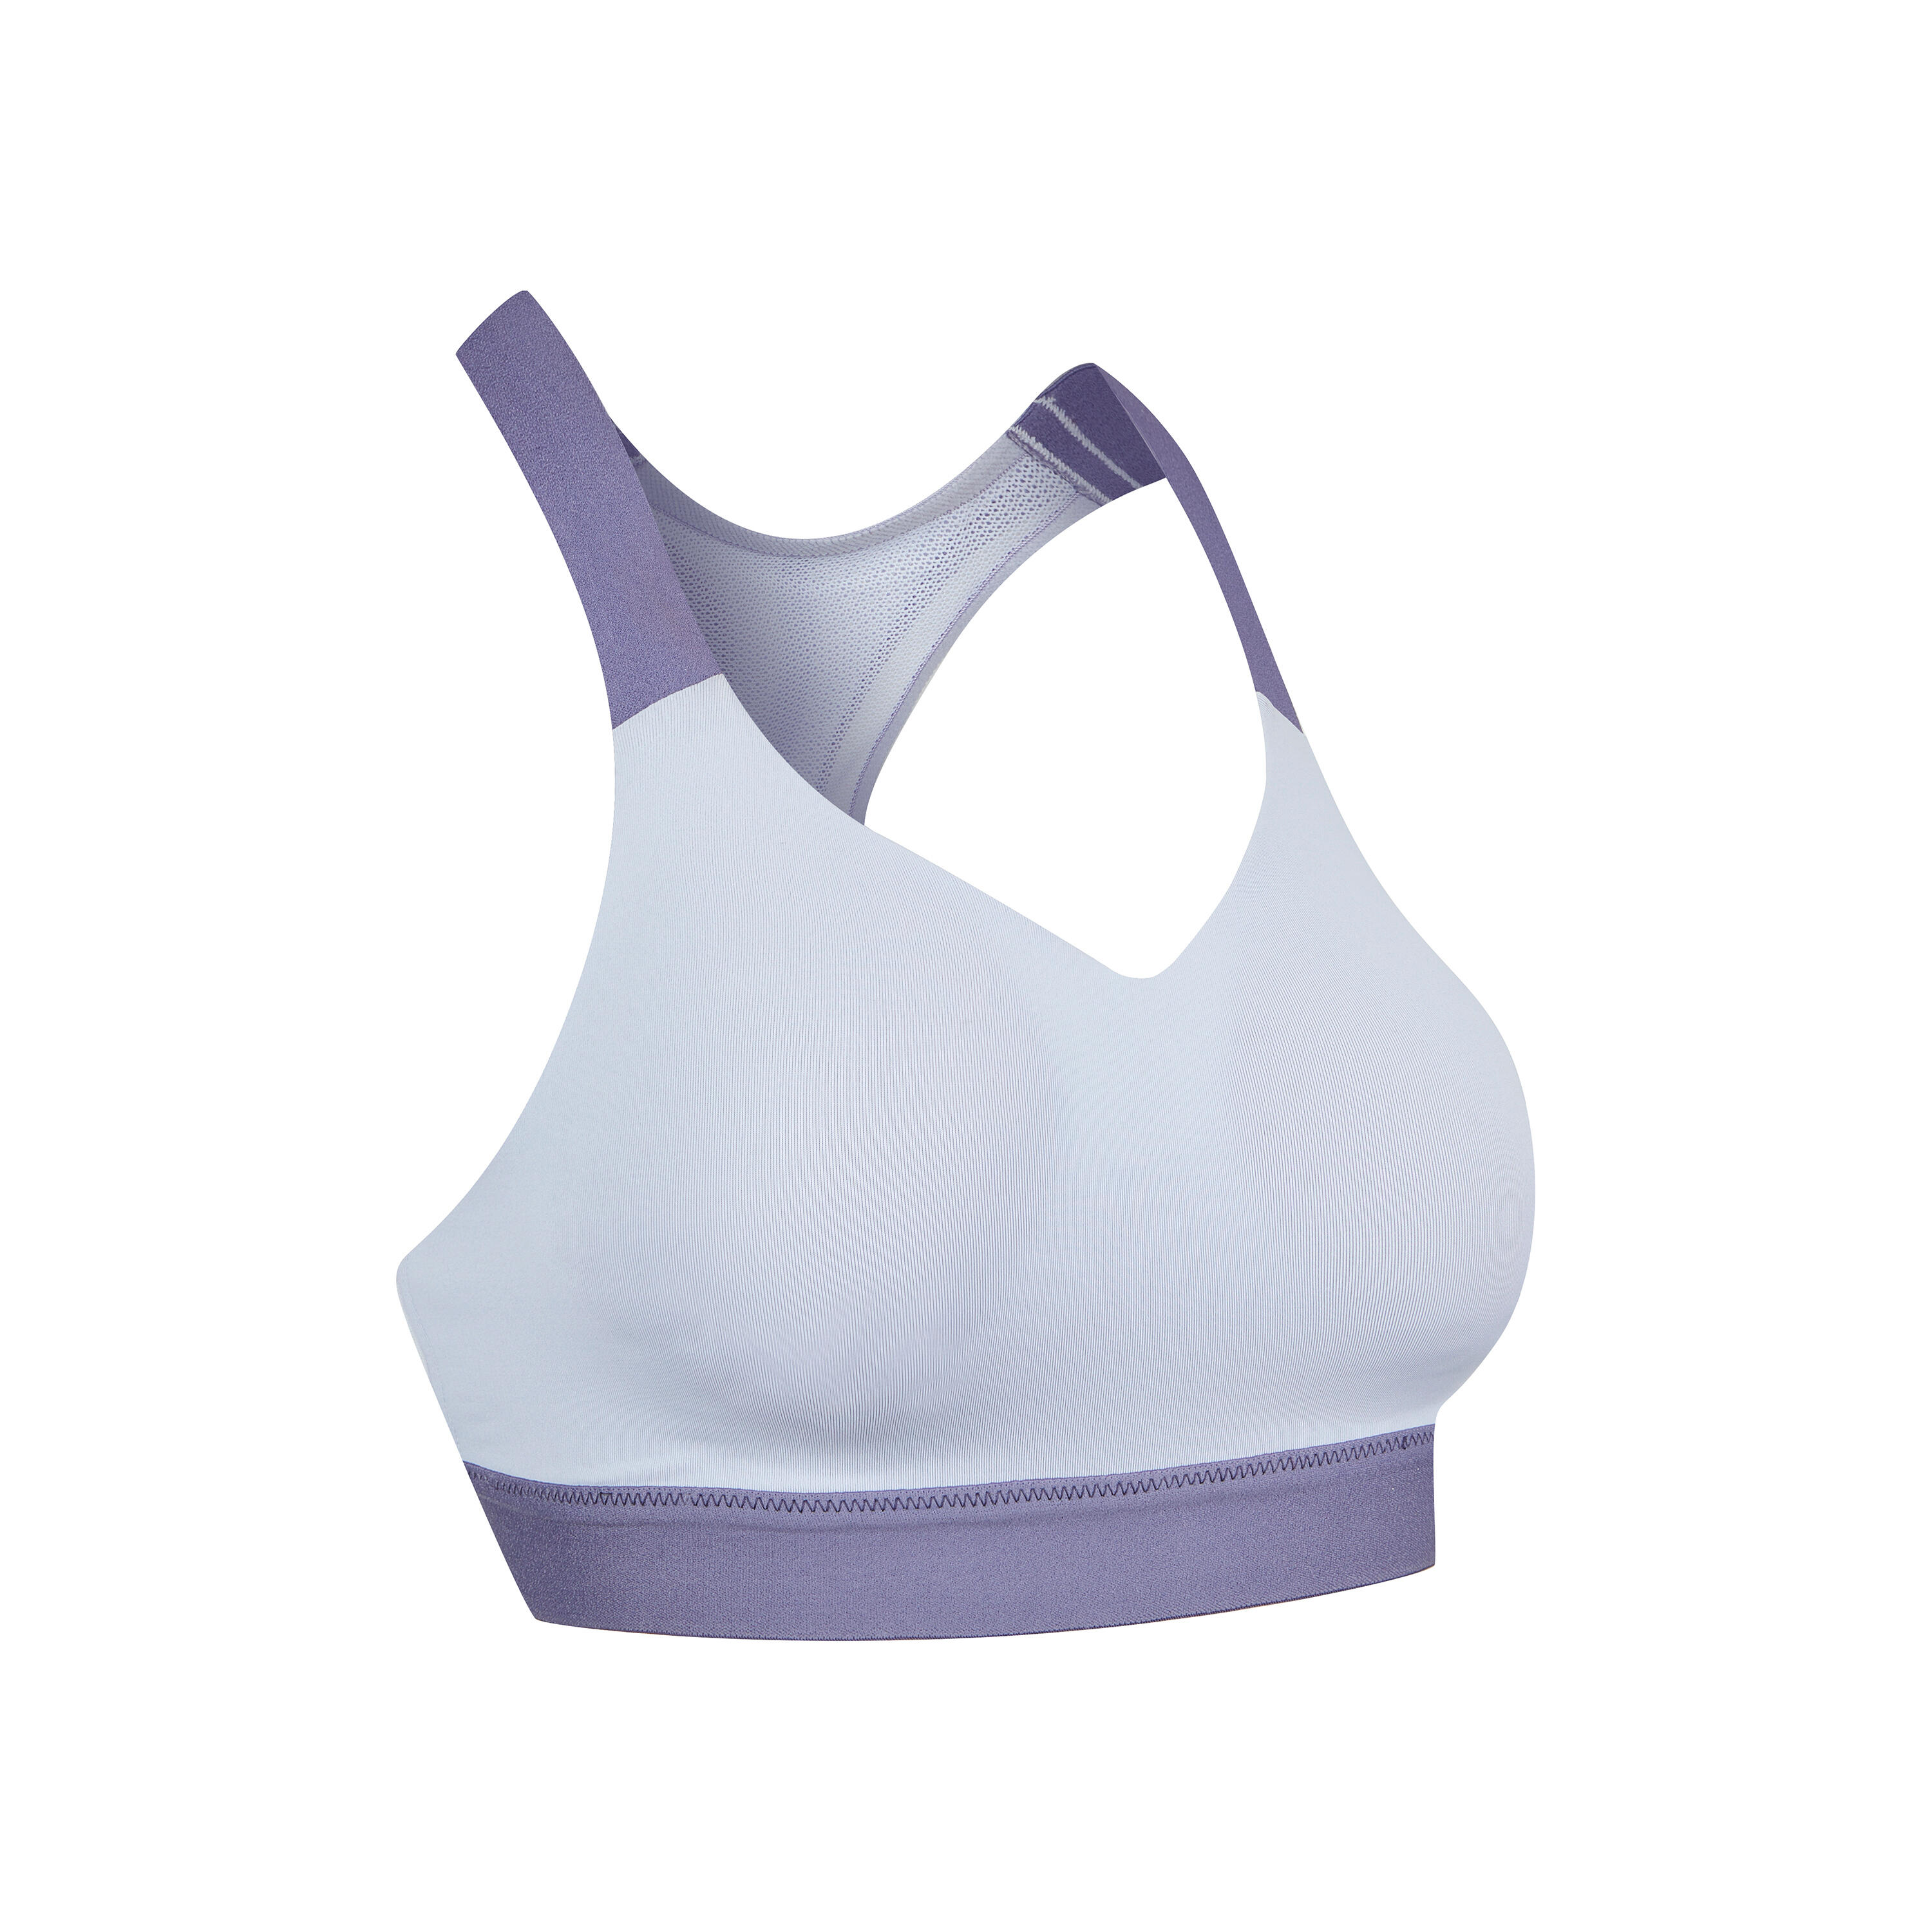 Buy Zelocity by Zivame Women's Synthetic Non-Wired Sports Bra